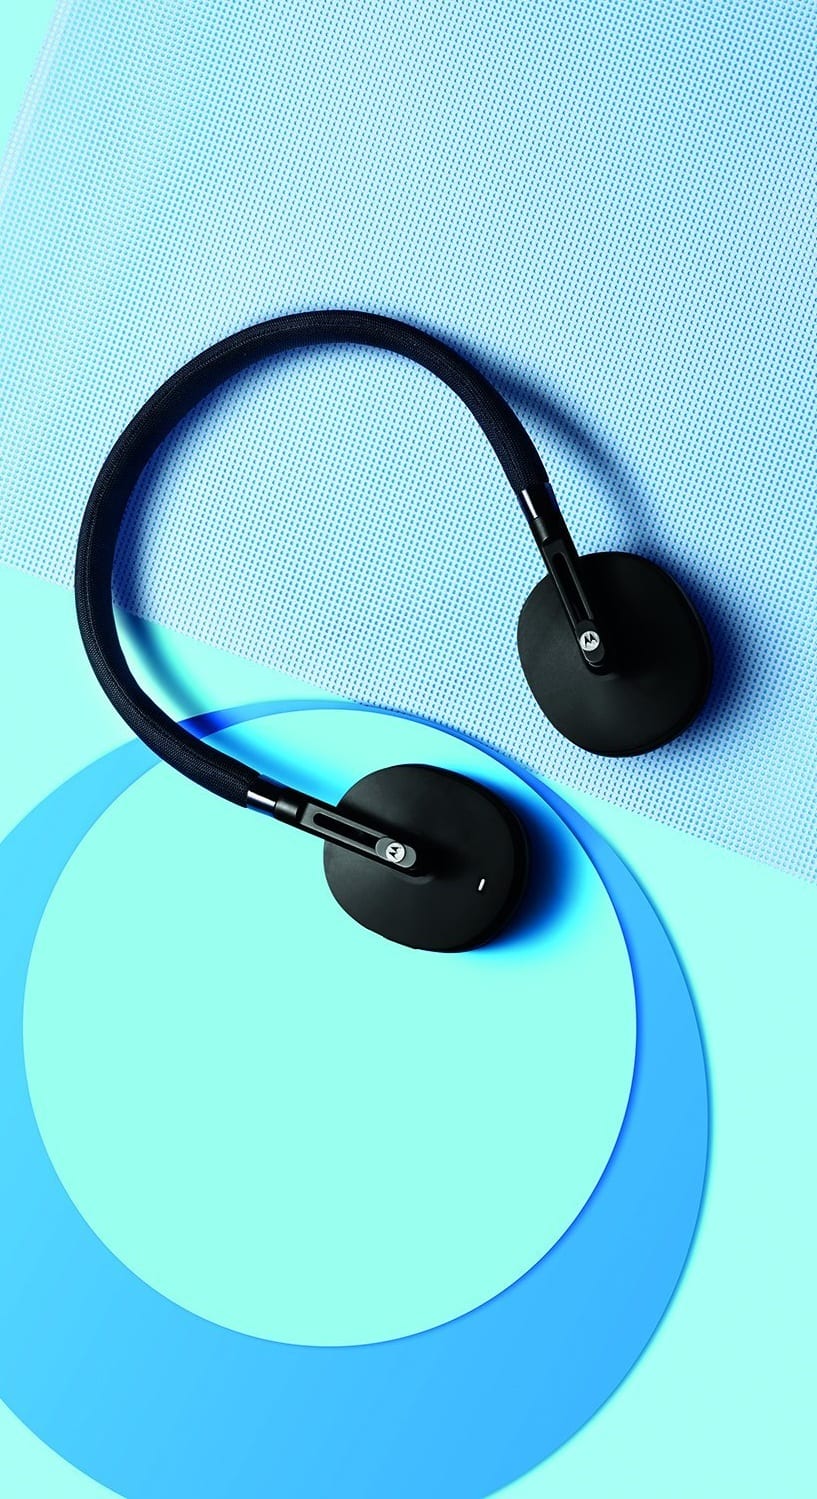 father's day gifts- wireless headphones